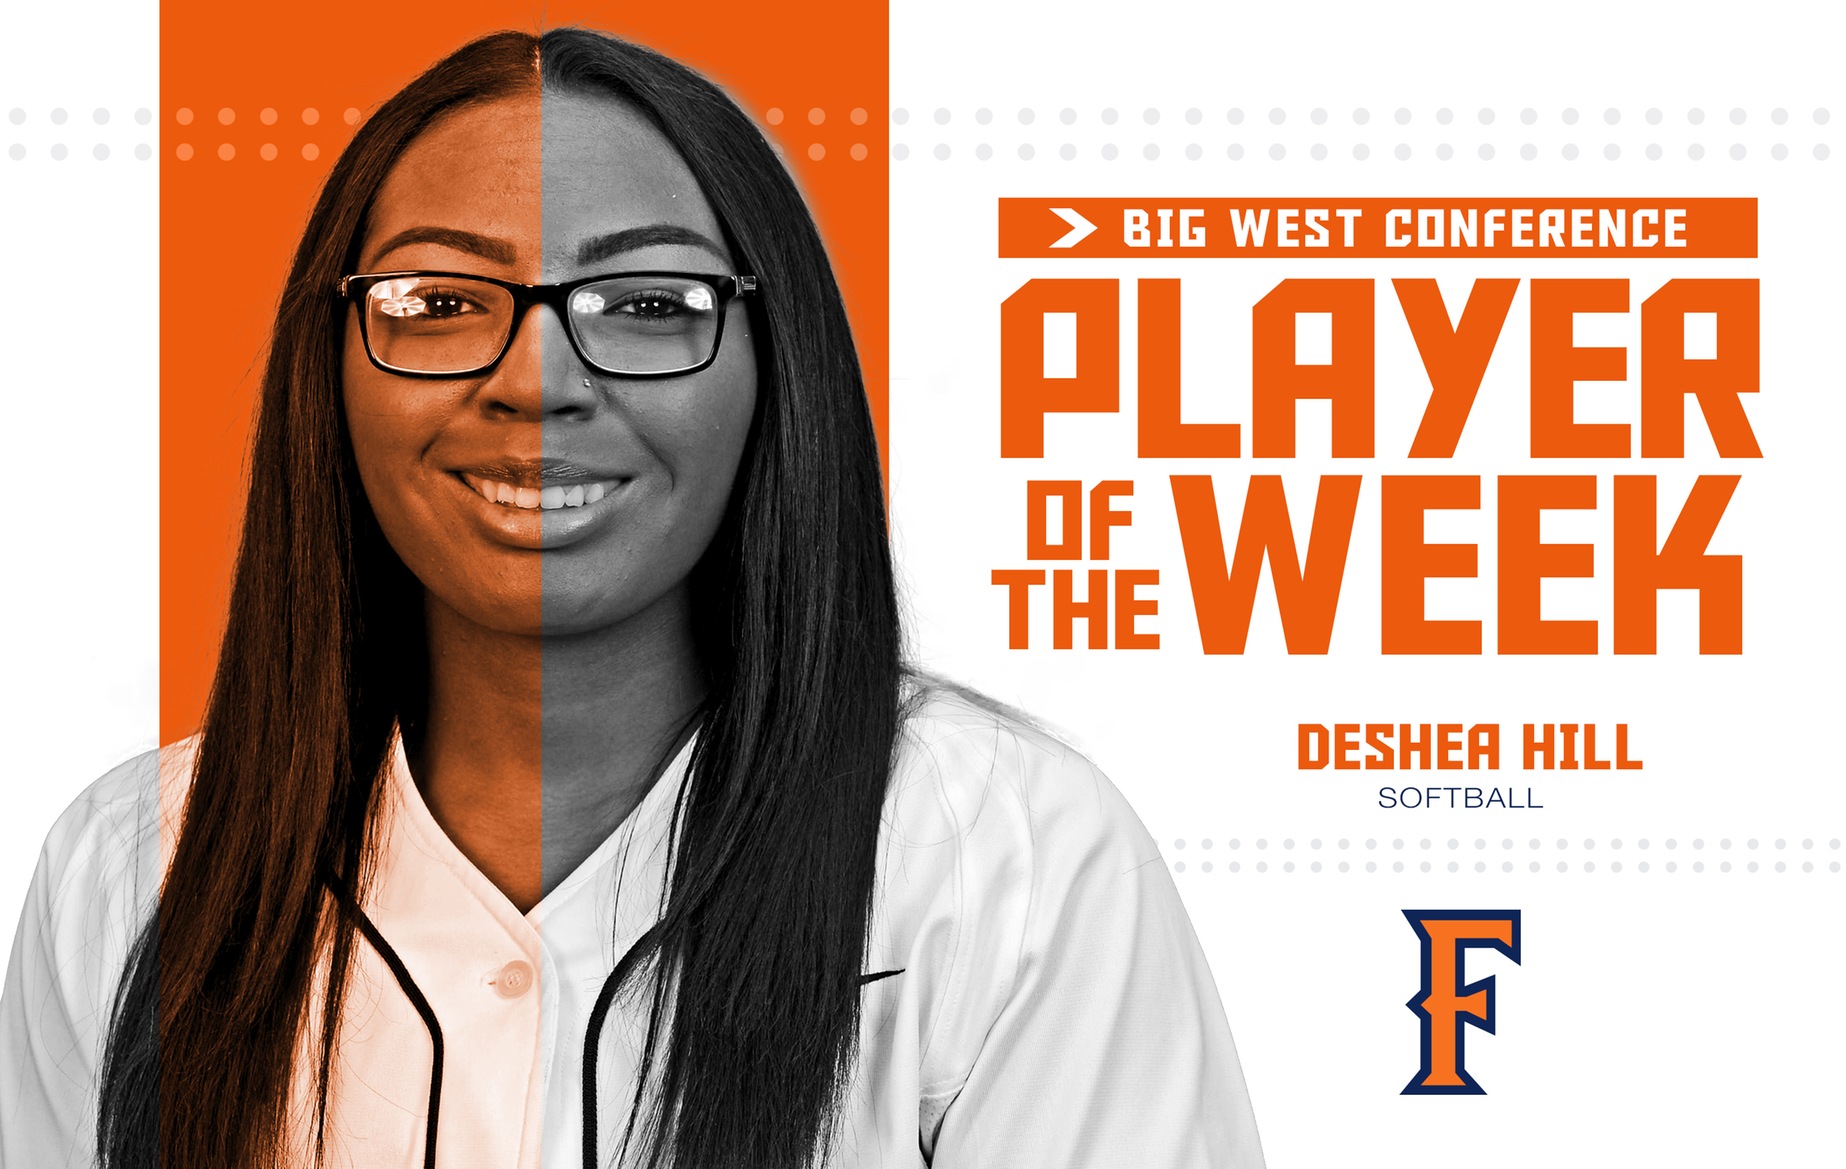 Hill Takes Home Second Big West Player of the Week Award